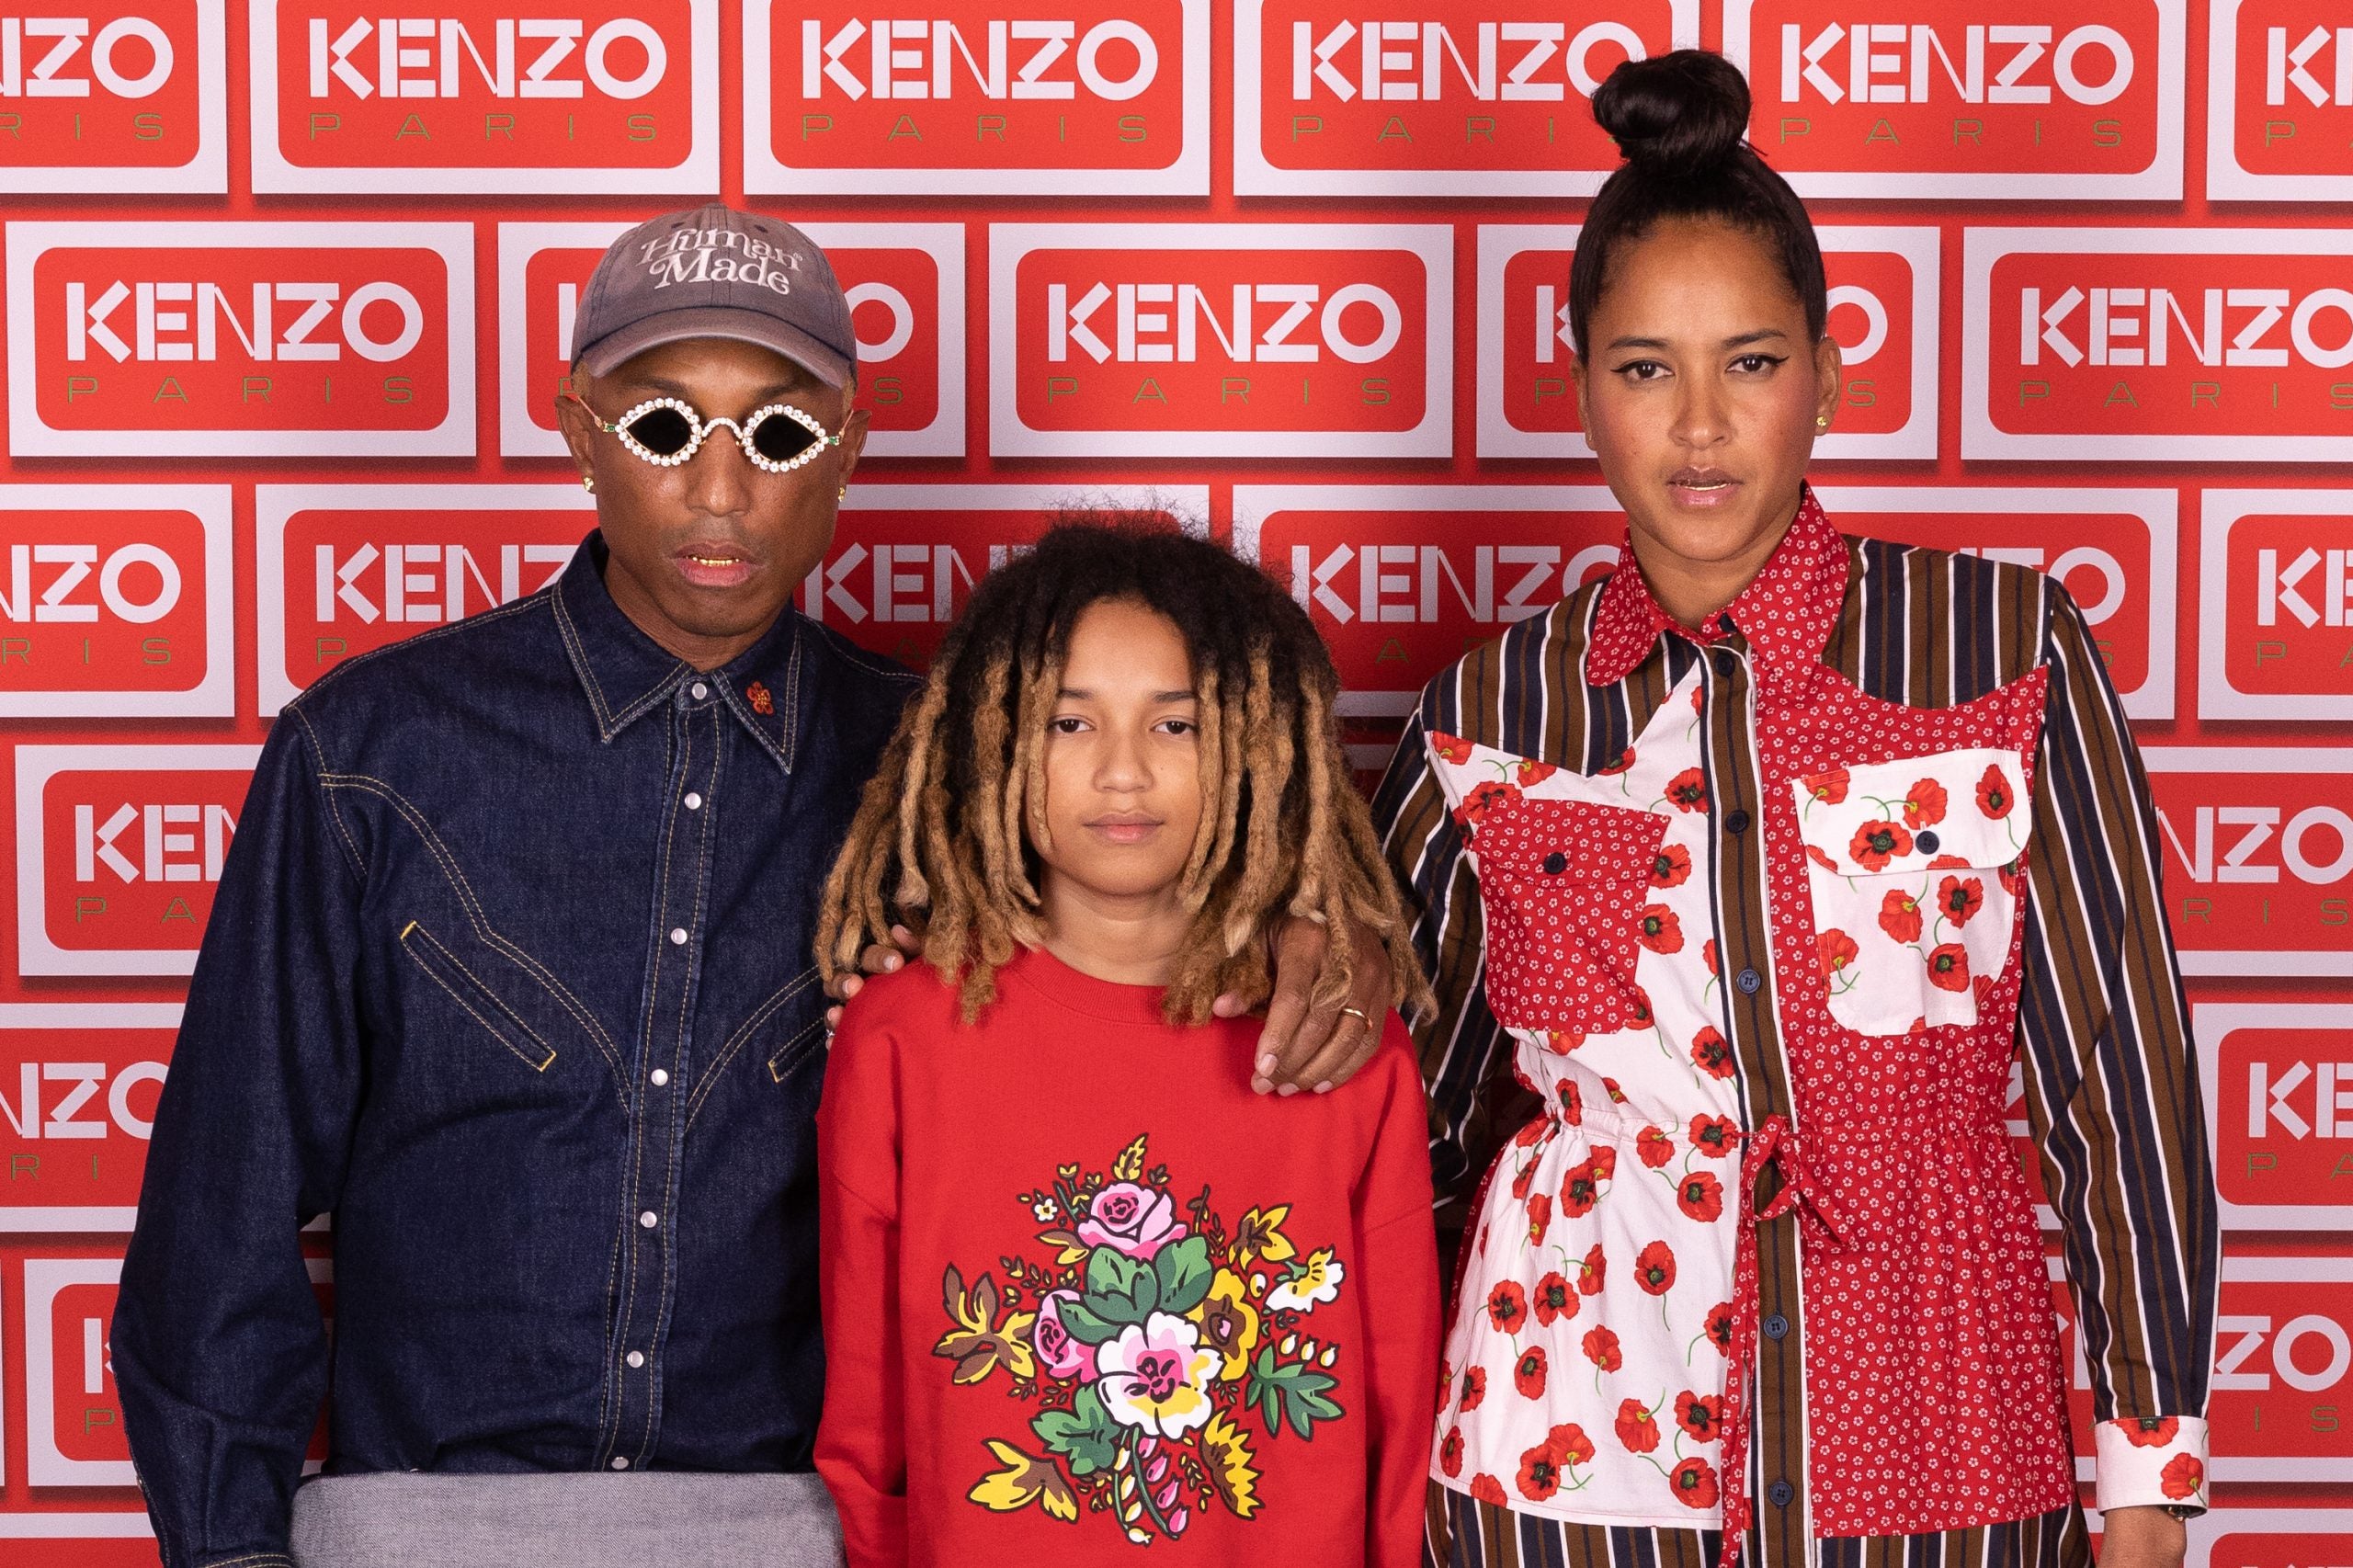 Pharrell Williams is joined by his wife Helen and son Rocket for a